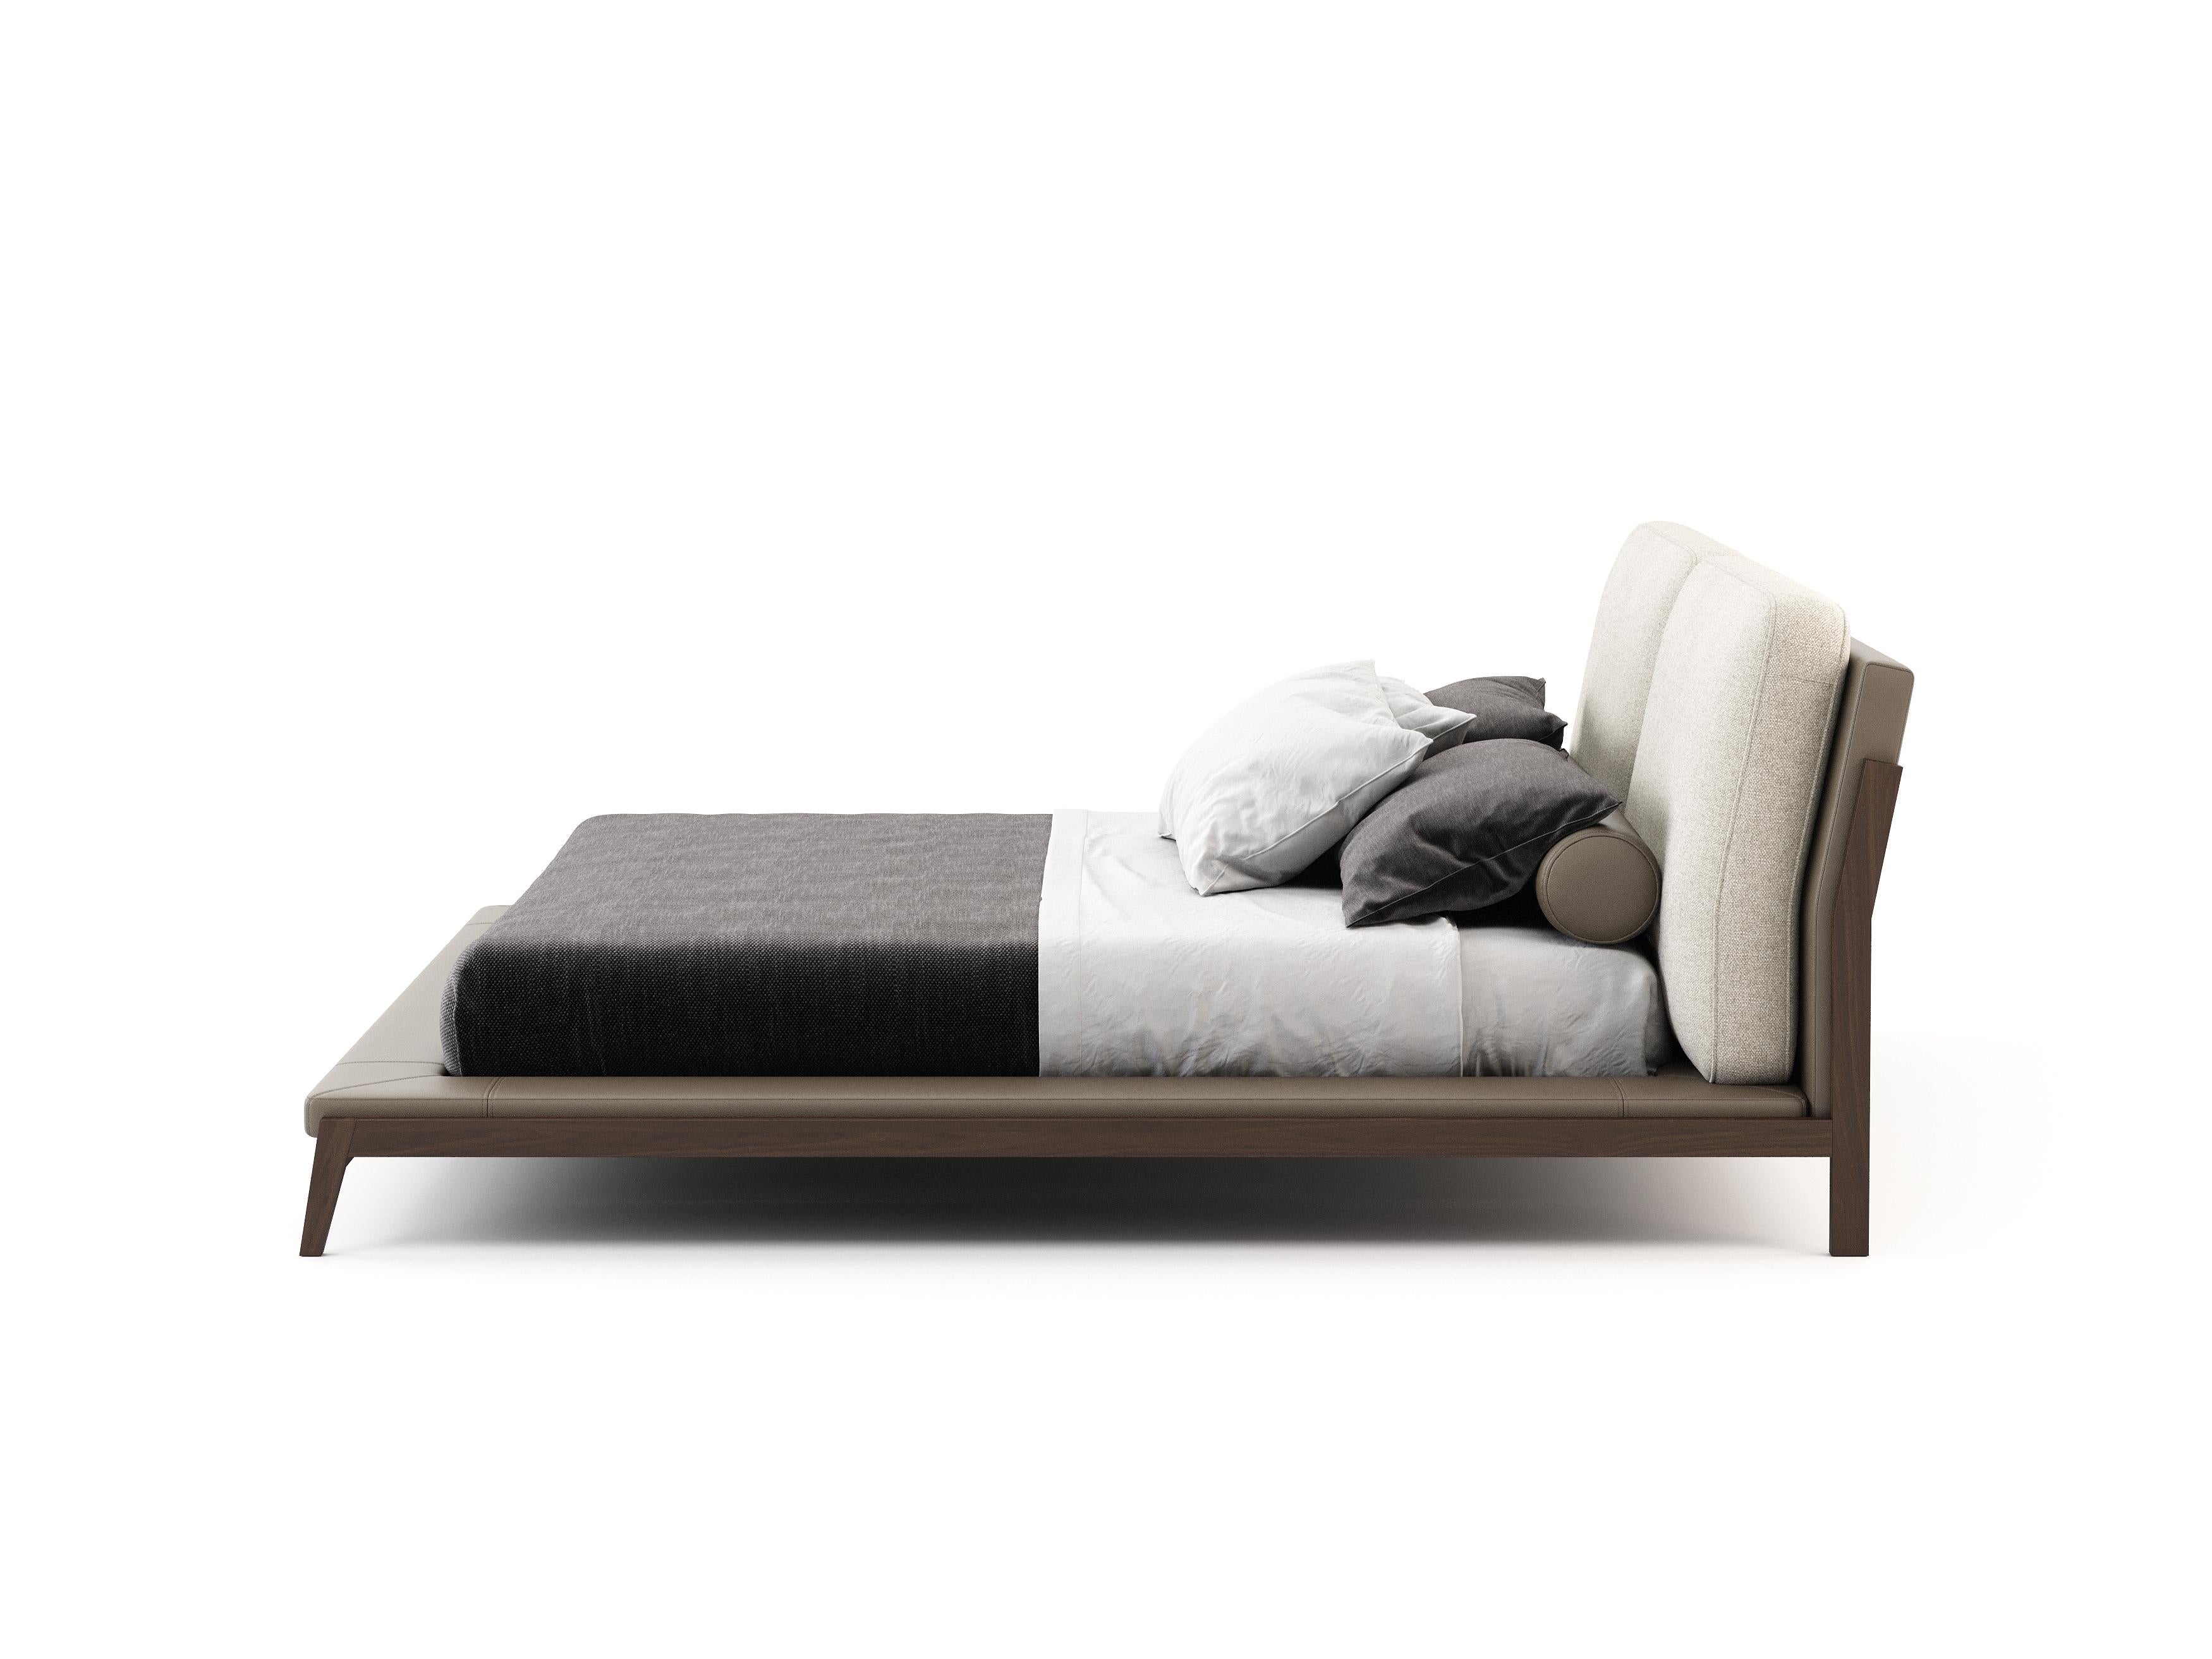 Hand-Crafted Queen Modern Milos Bed Made with Walnut and Leather, Handmade by Stylish Club For Sale